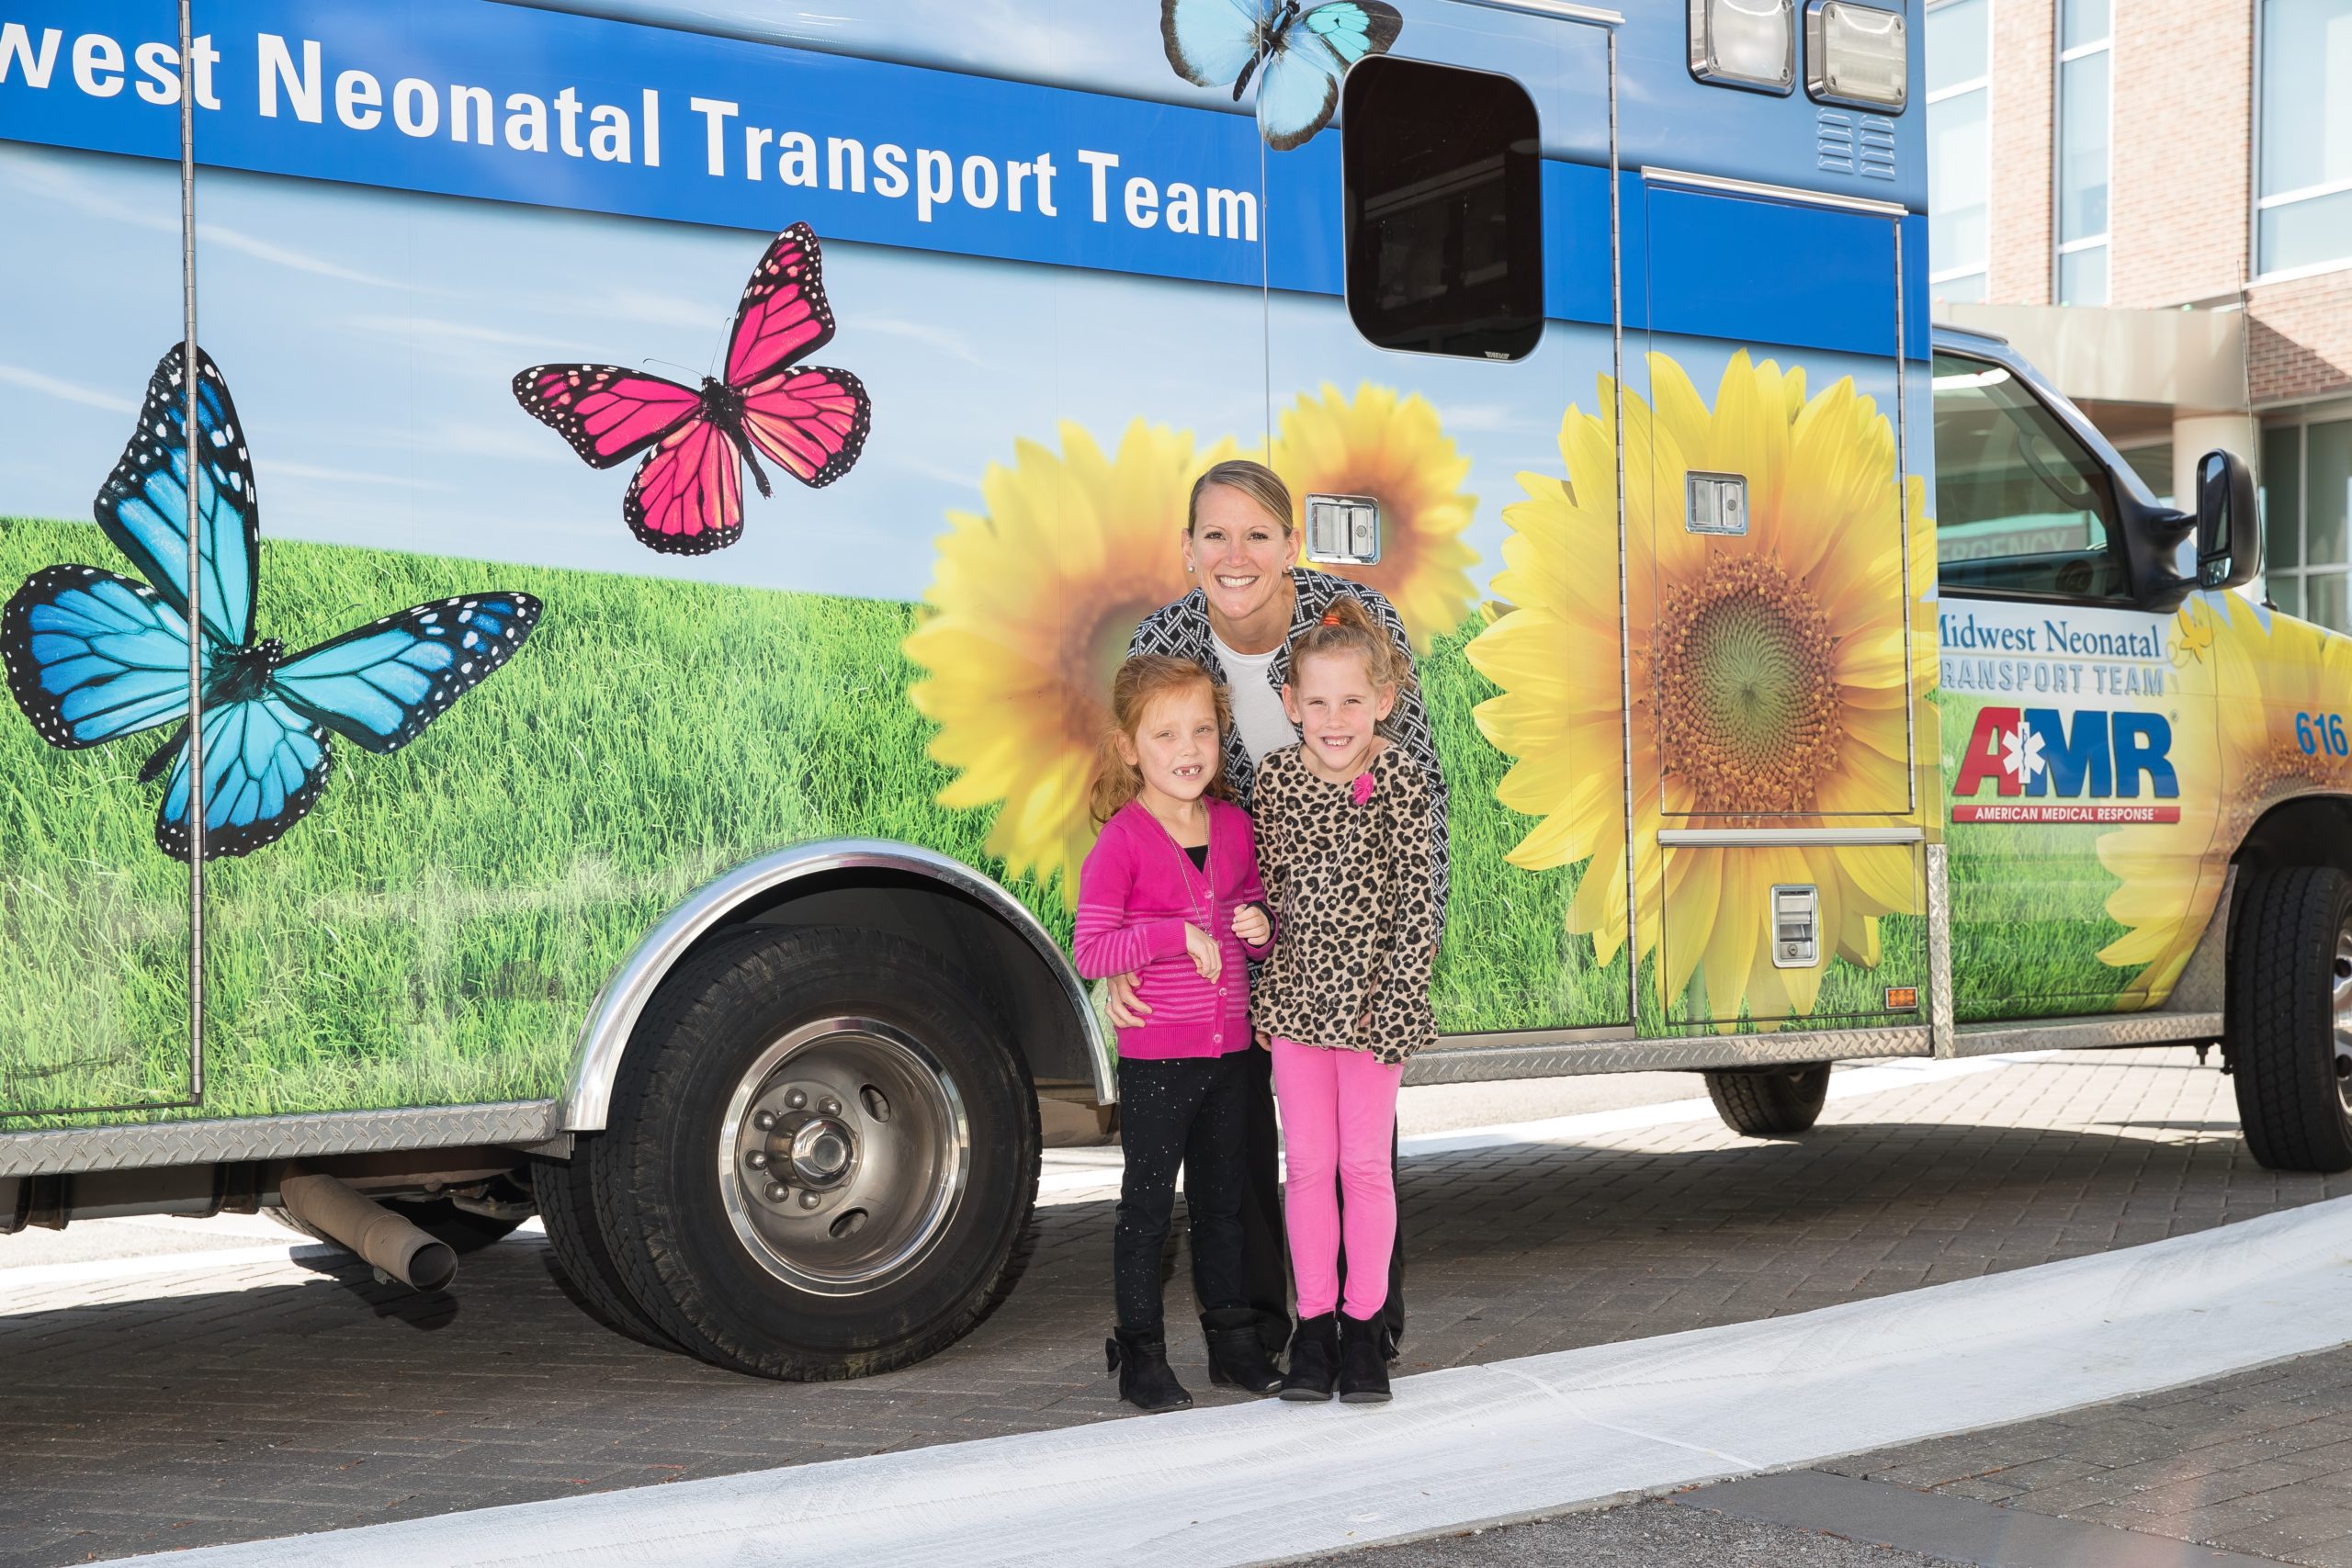 Woman and two girls standing next to neonatal transport ambulance